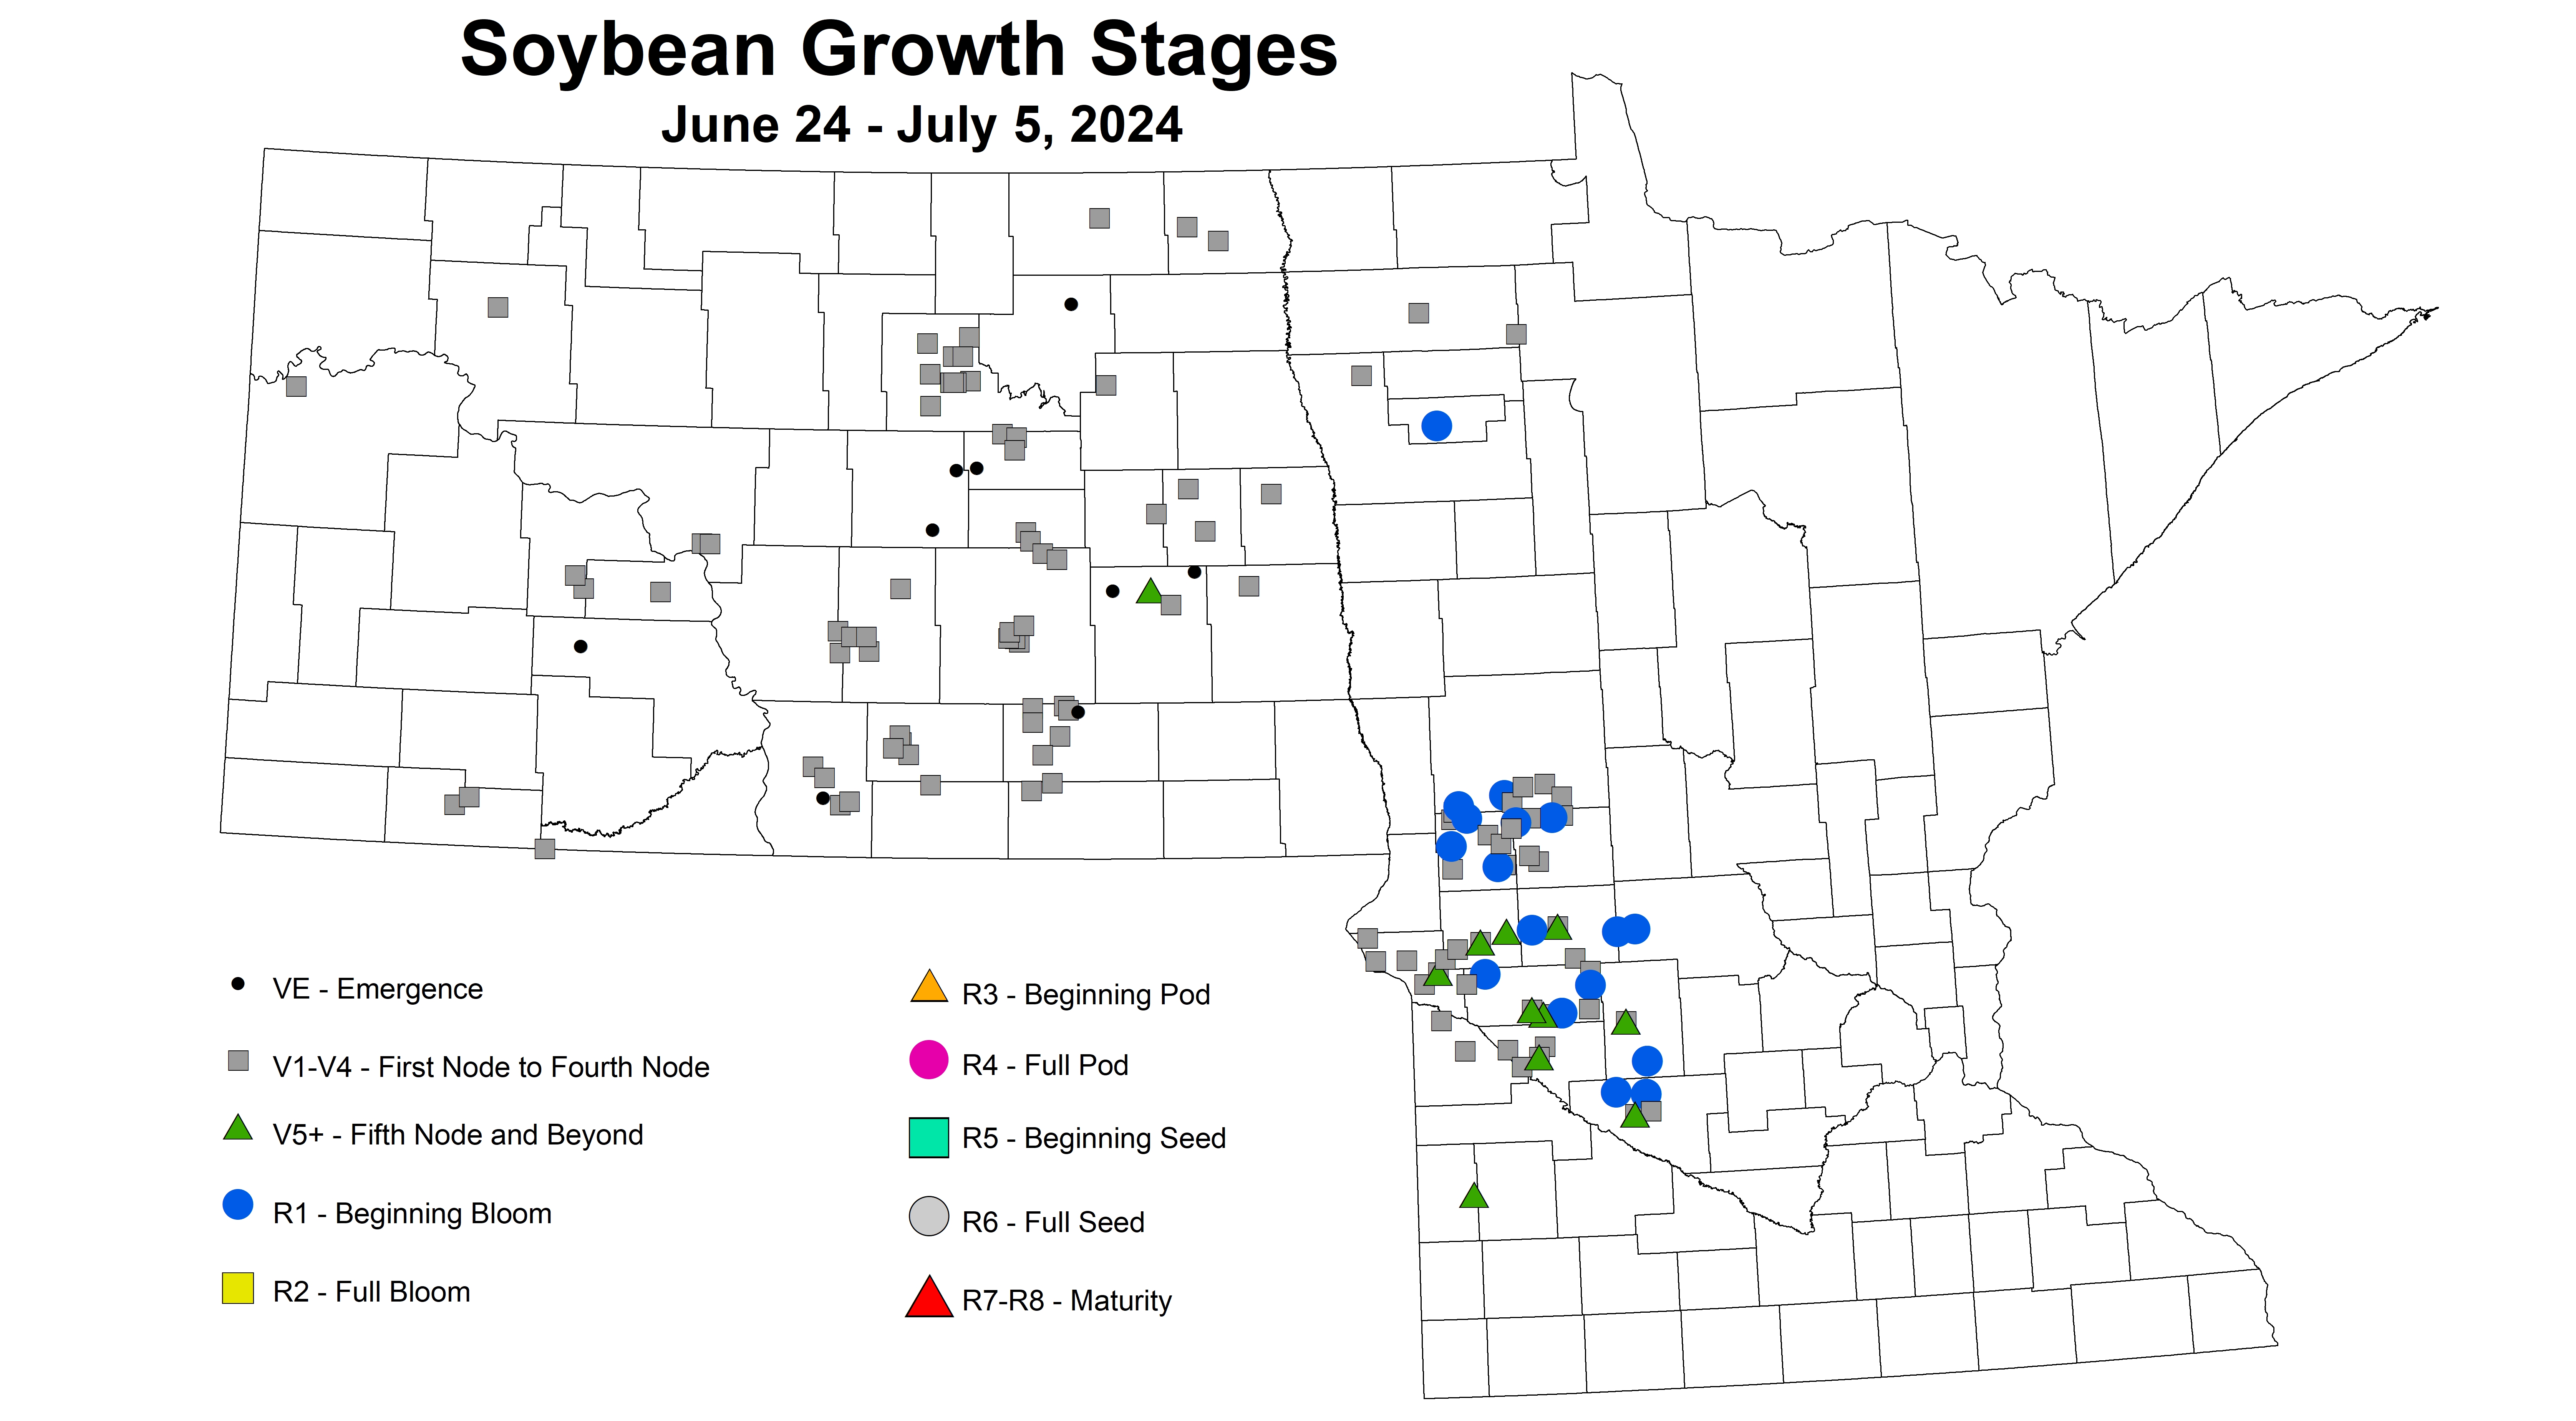 soybean growth stages June 24 to July 5 2024